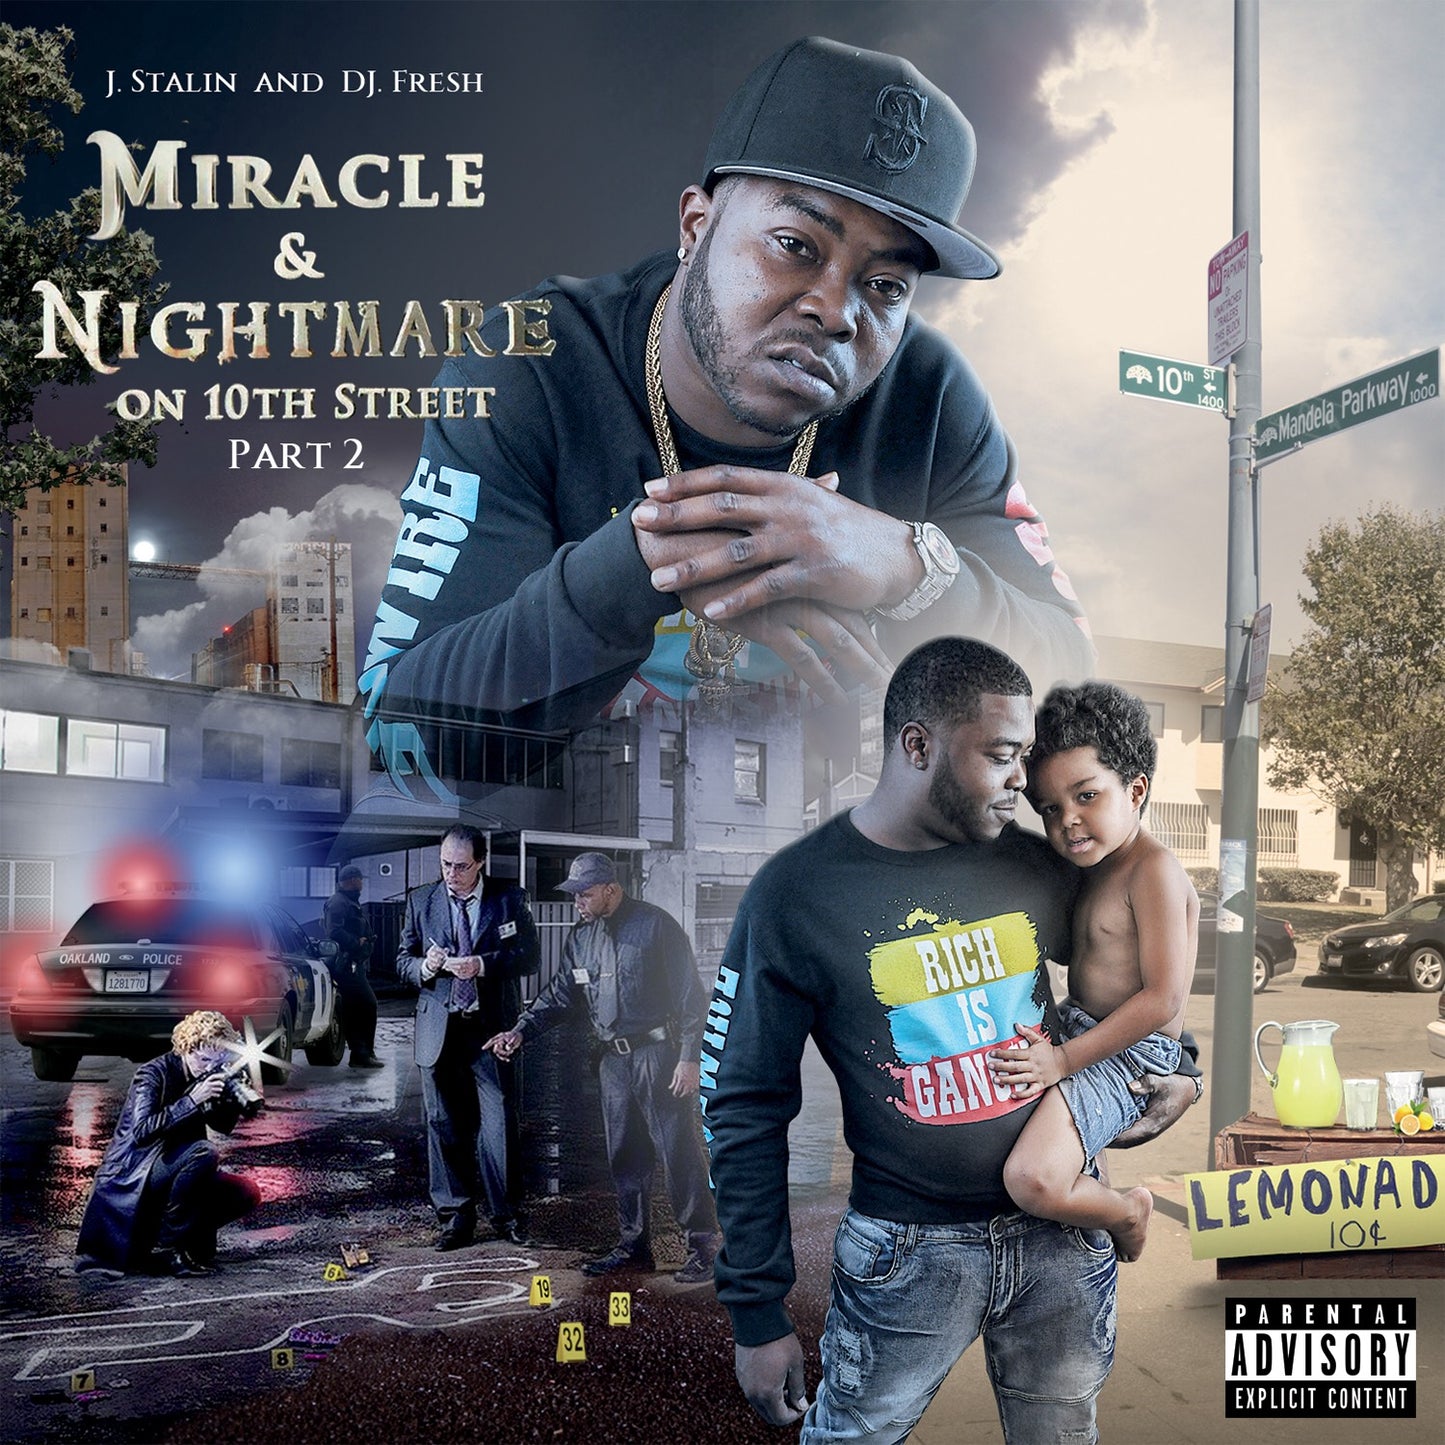 J Stalin & DJ Fresh - Miracle and Nightmare On 10th Street Pt. 2 (CD)